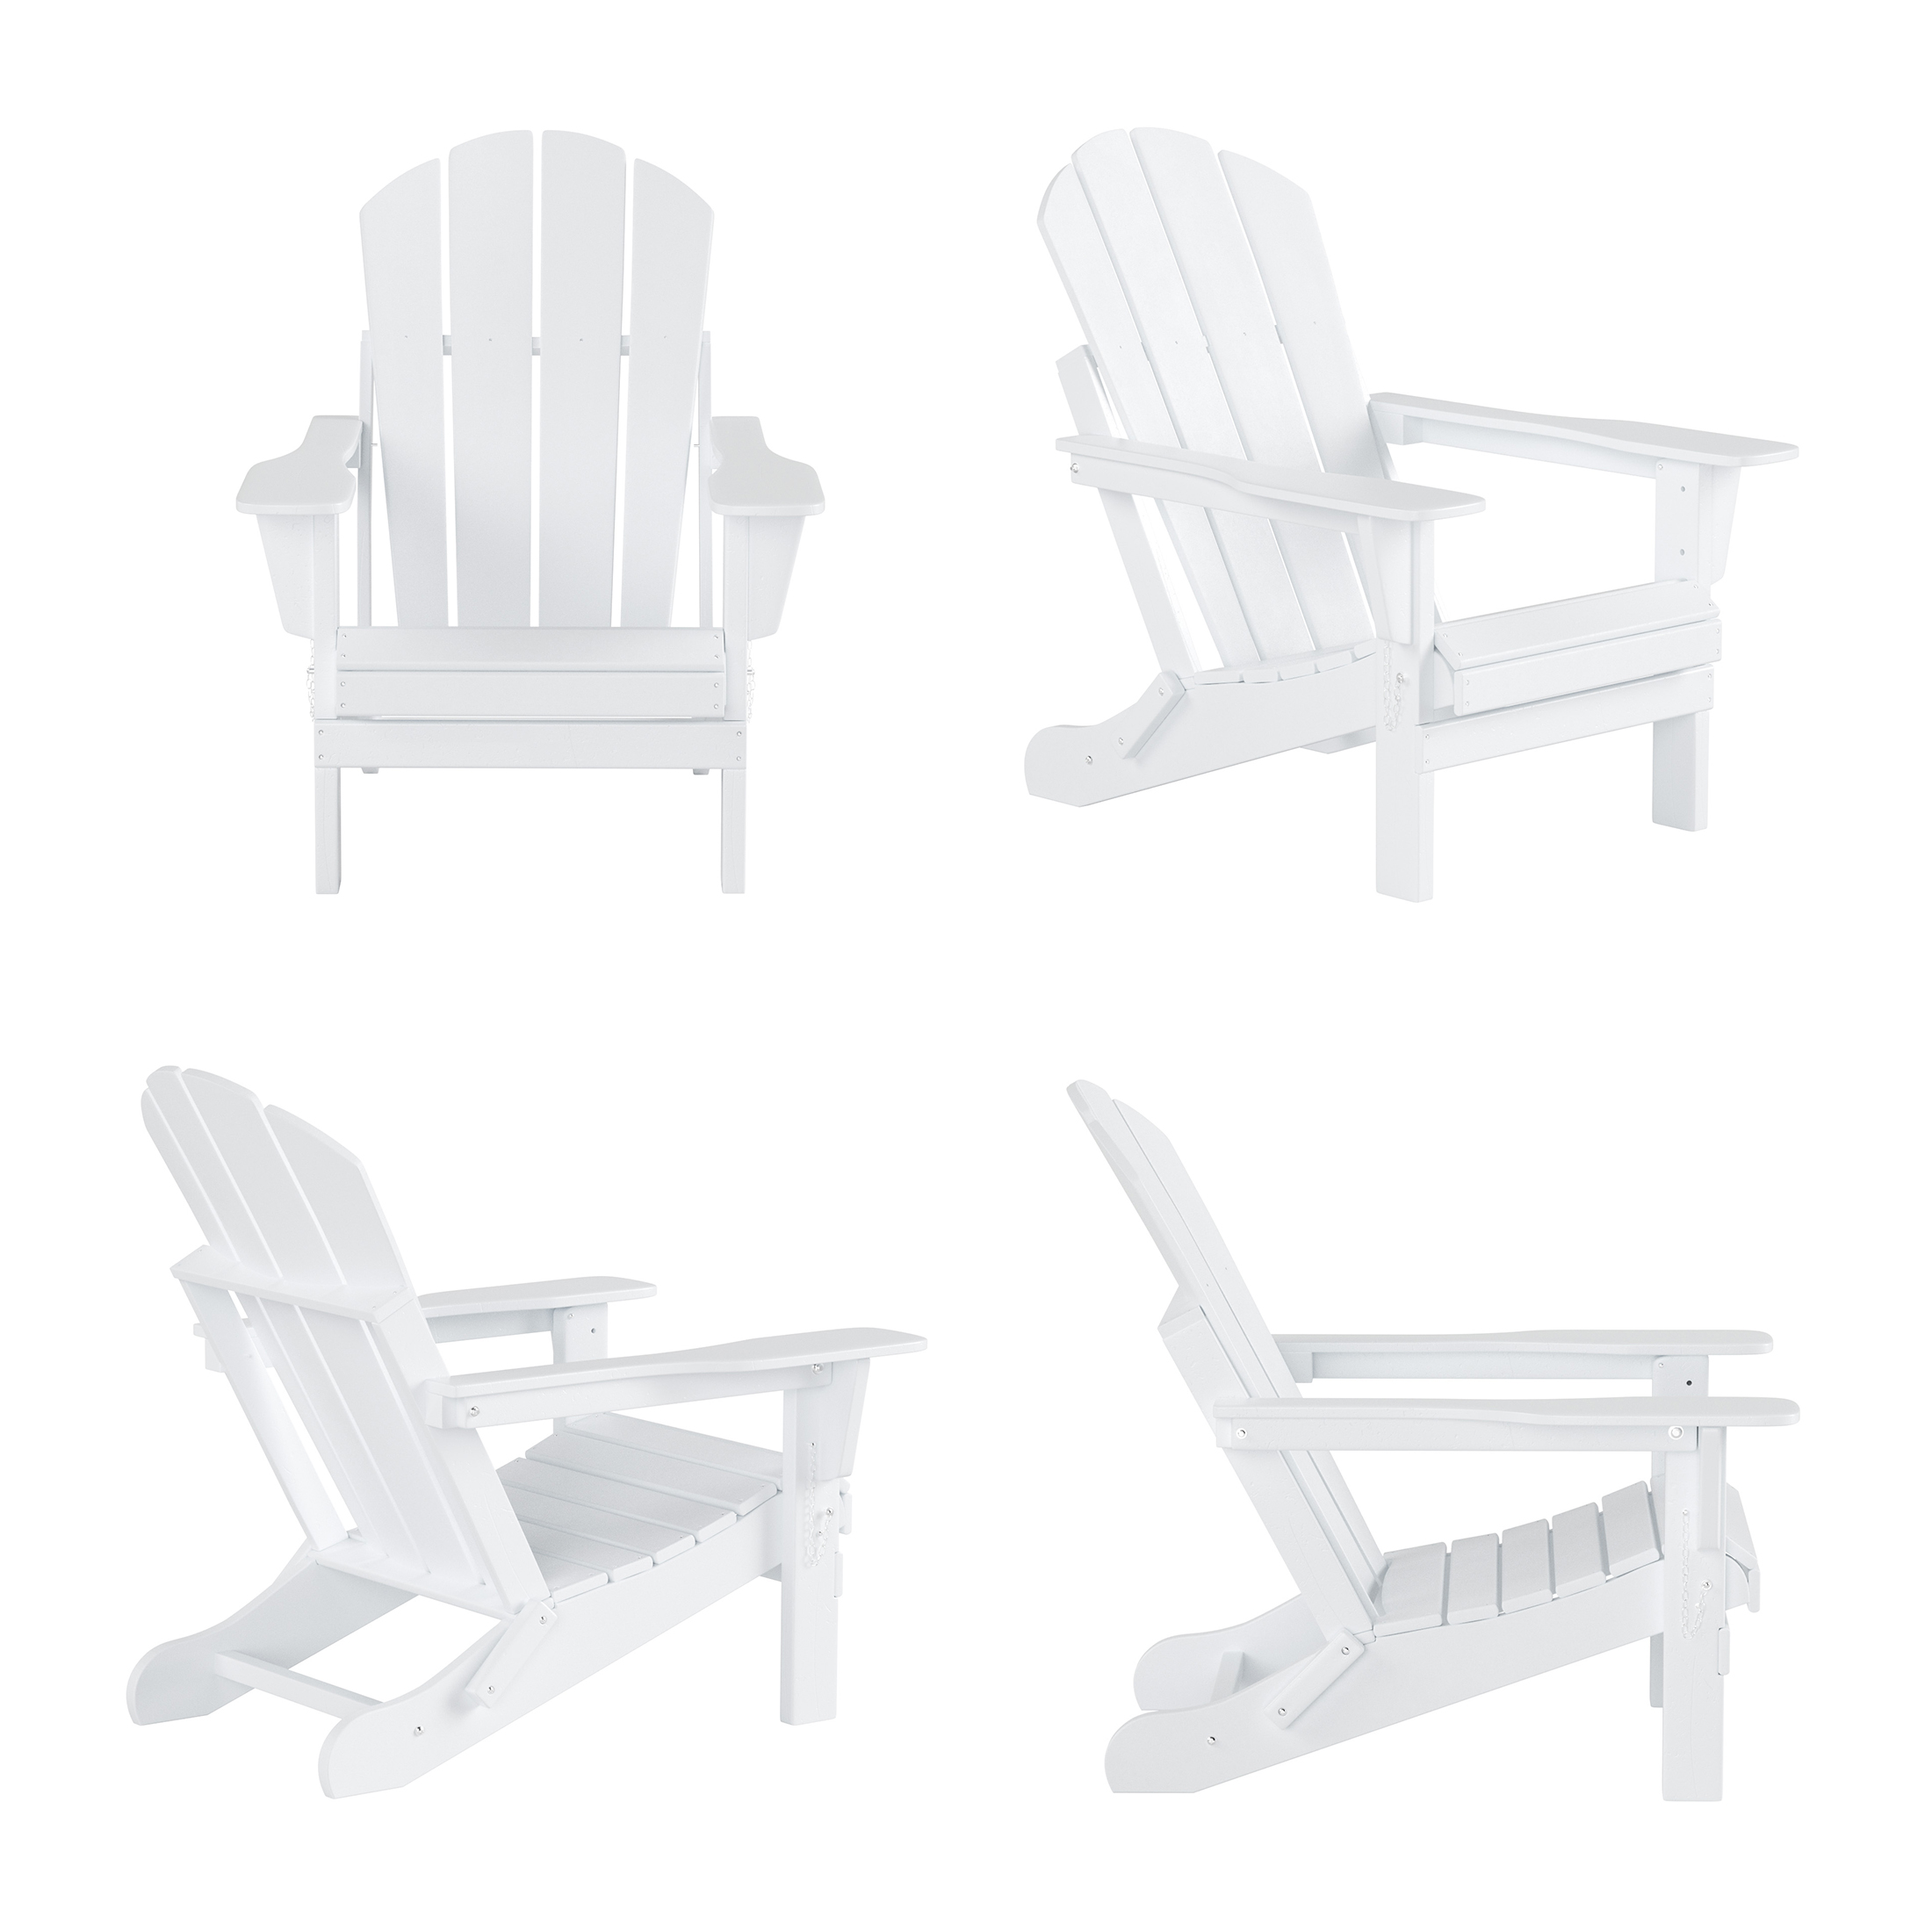 WestinTrends Malibu Outdoor Lounge Chairs Set, 5-Pieces Adirondack Chair Set of 2 with Ottoman and Side Table, All Weather Poly Lumber Patio Lawn Folding Chair for Outside, White - image 4 of 7